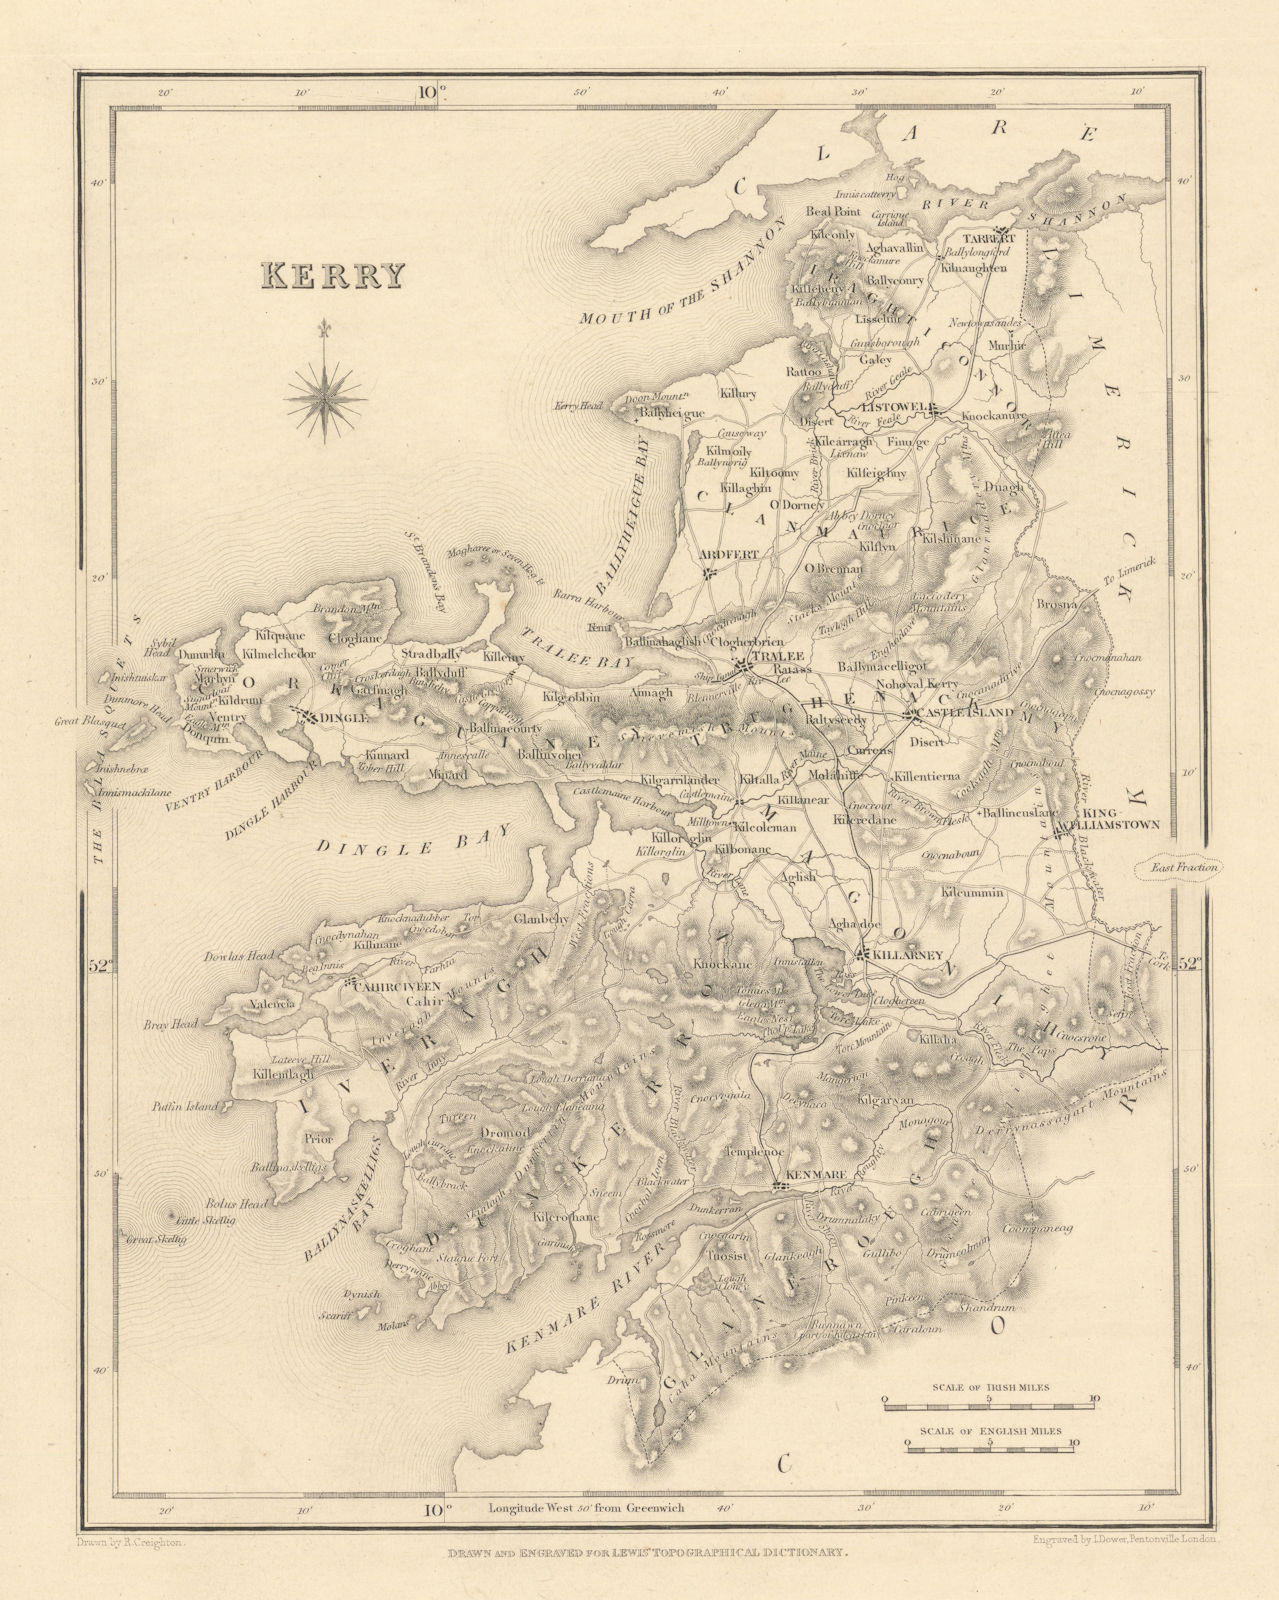 COUNTY KERRY antique map for LEWIS by CREIGHTON & DOWER - Ireland 1837 old